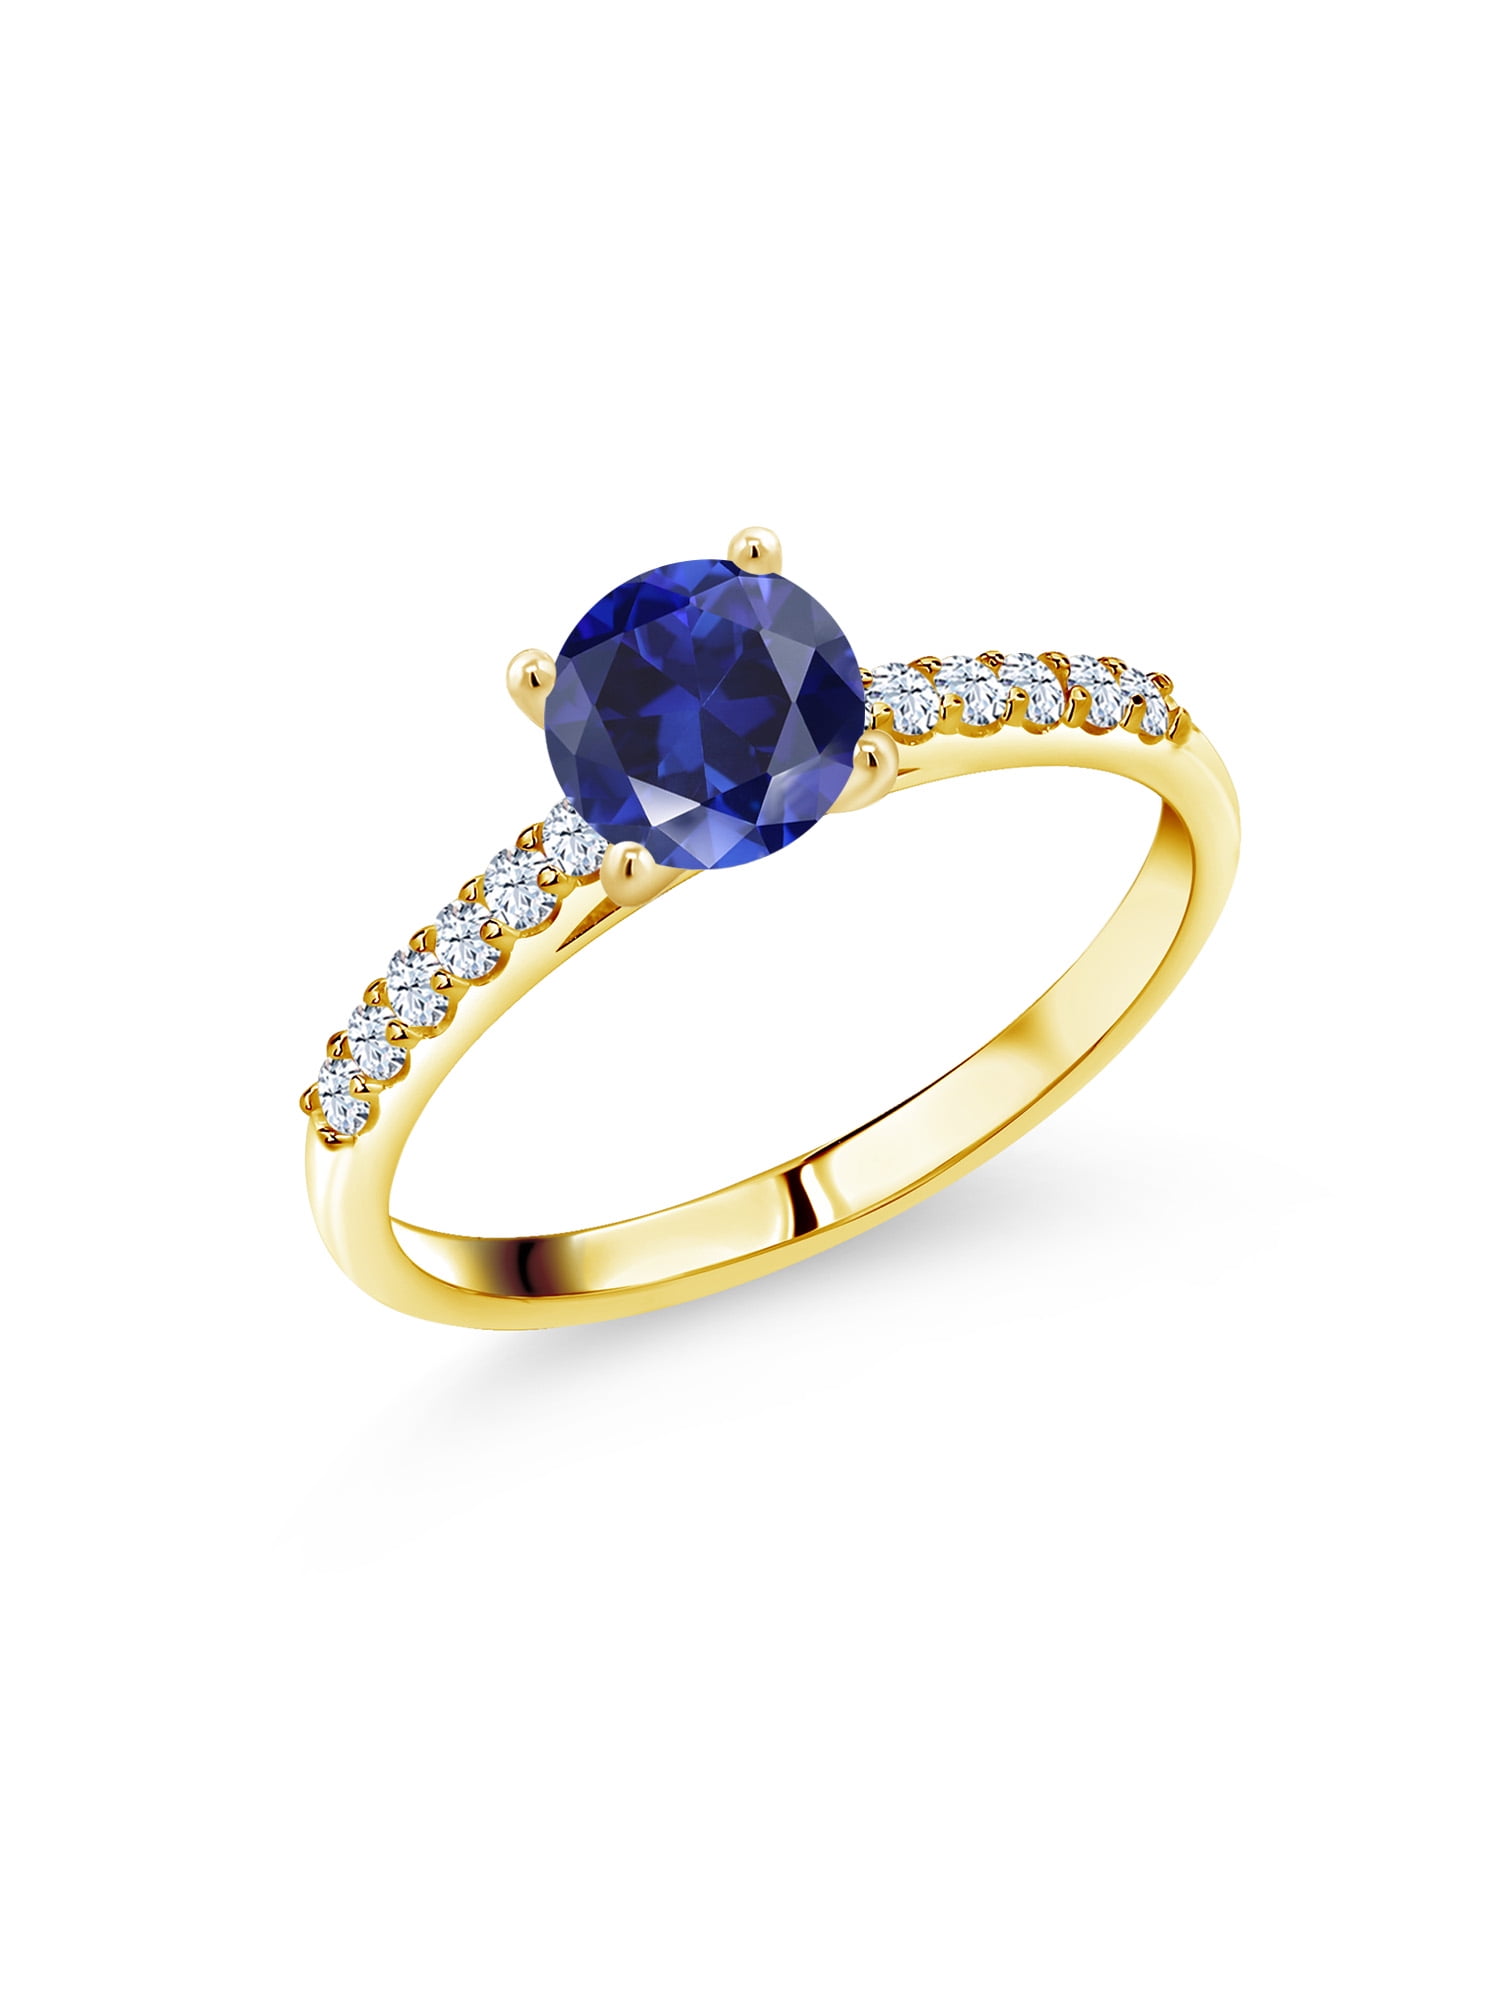 Gem Stone King 1.18 Ct 6mm Round Blue Created Sapphire White Created  Sapphire 10K Yellow Gold Ring